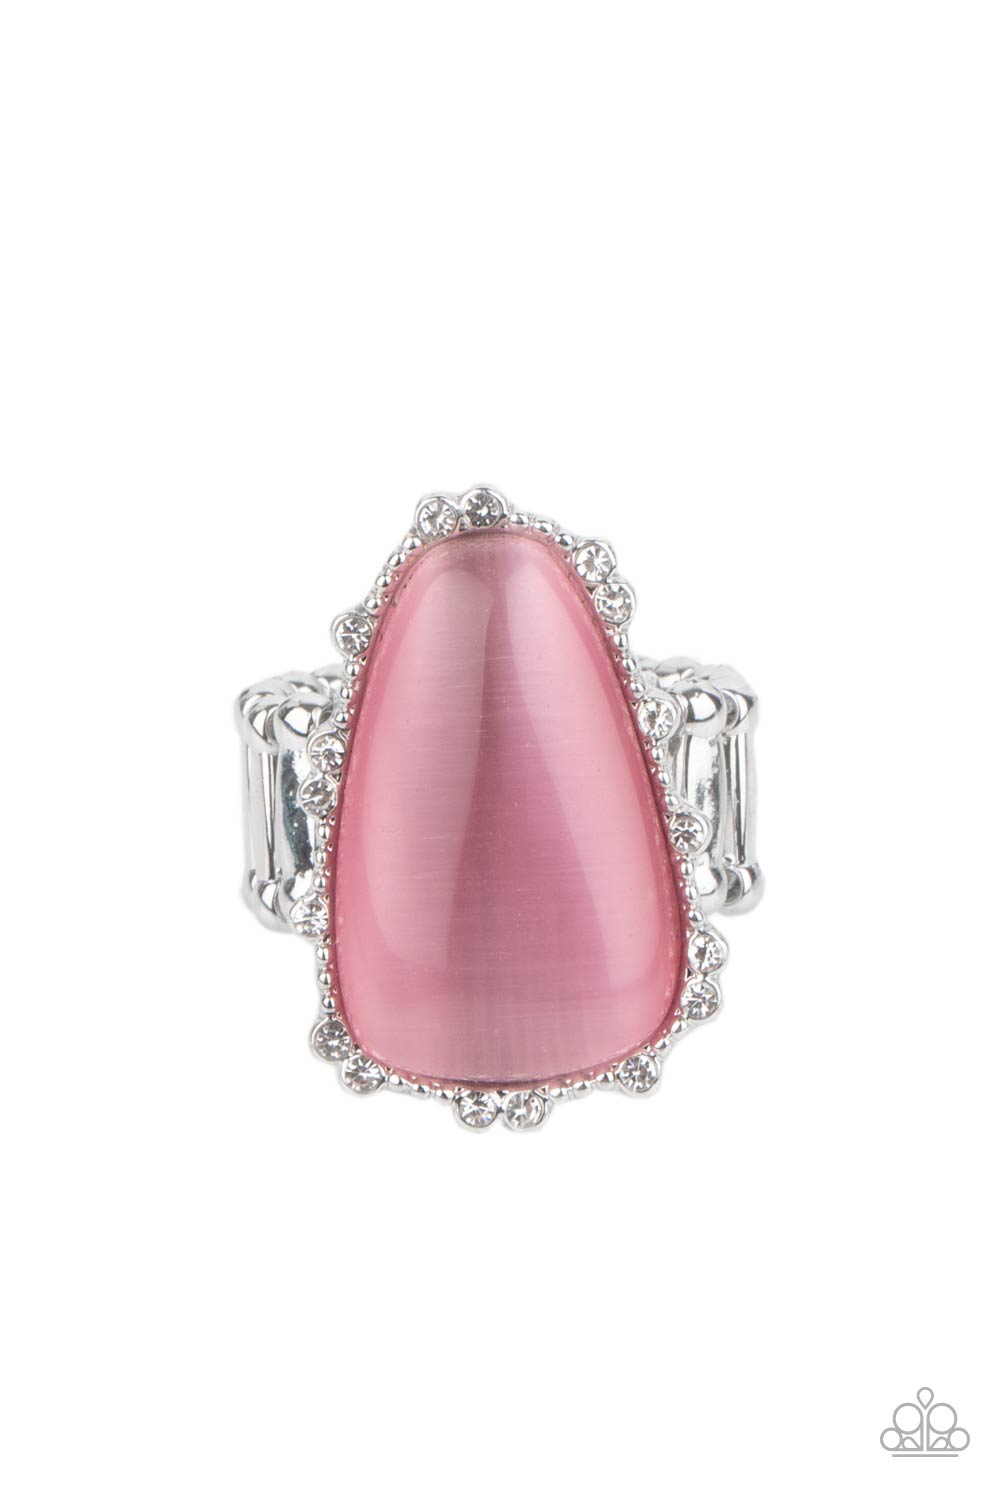 Paparazzi Jewelry Newport Nouveau - Pink Ring A Finishing Touch Jewelry A tranquil asymmetrical pink cat's eye stone is encased in a delicately dotted shimmery silver frame.Features a stretchy band for a flexible fit. Sold as one individual ring.